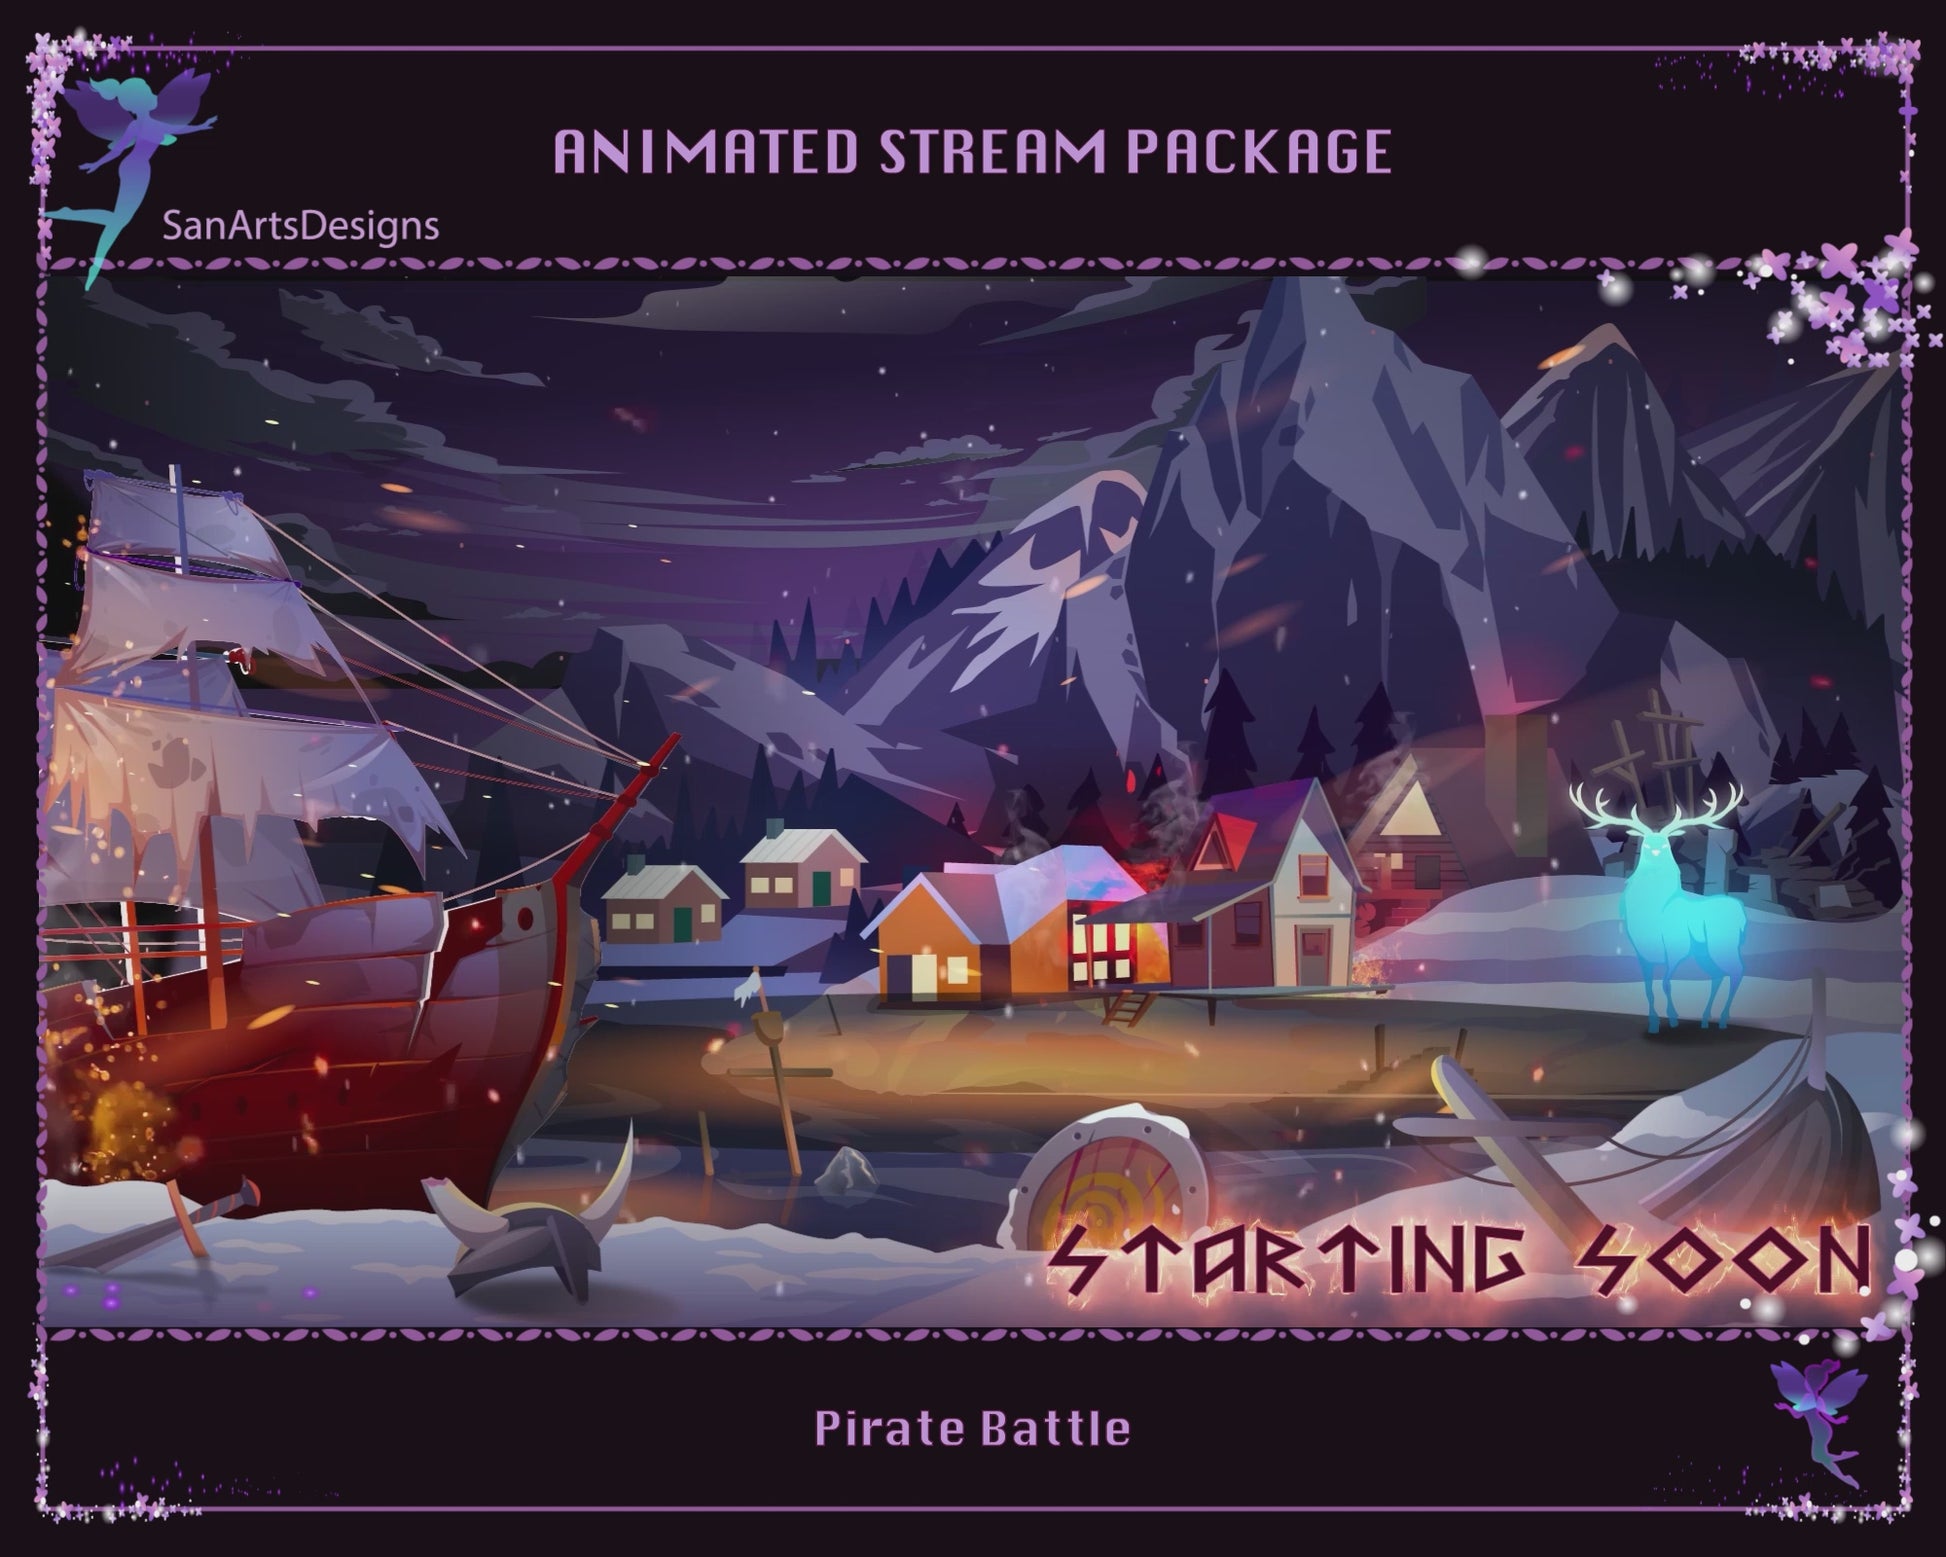 Animated Stream Package Pirate Battle